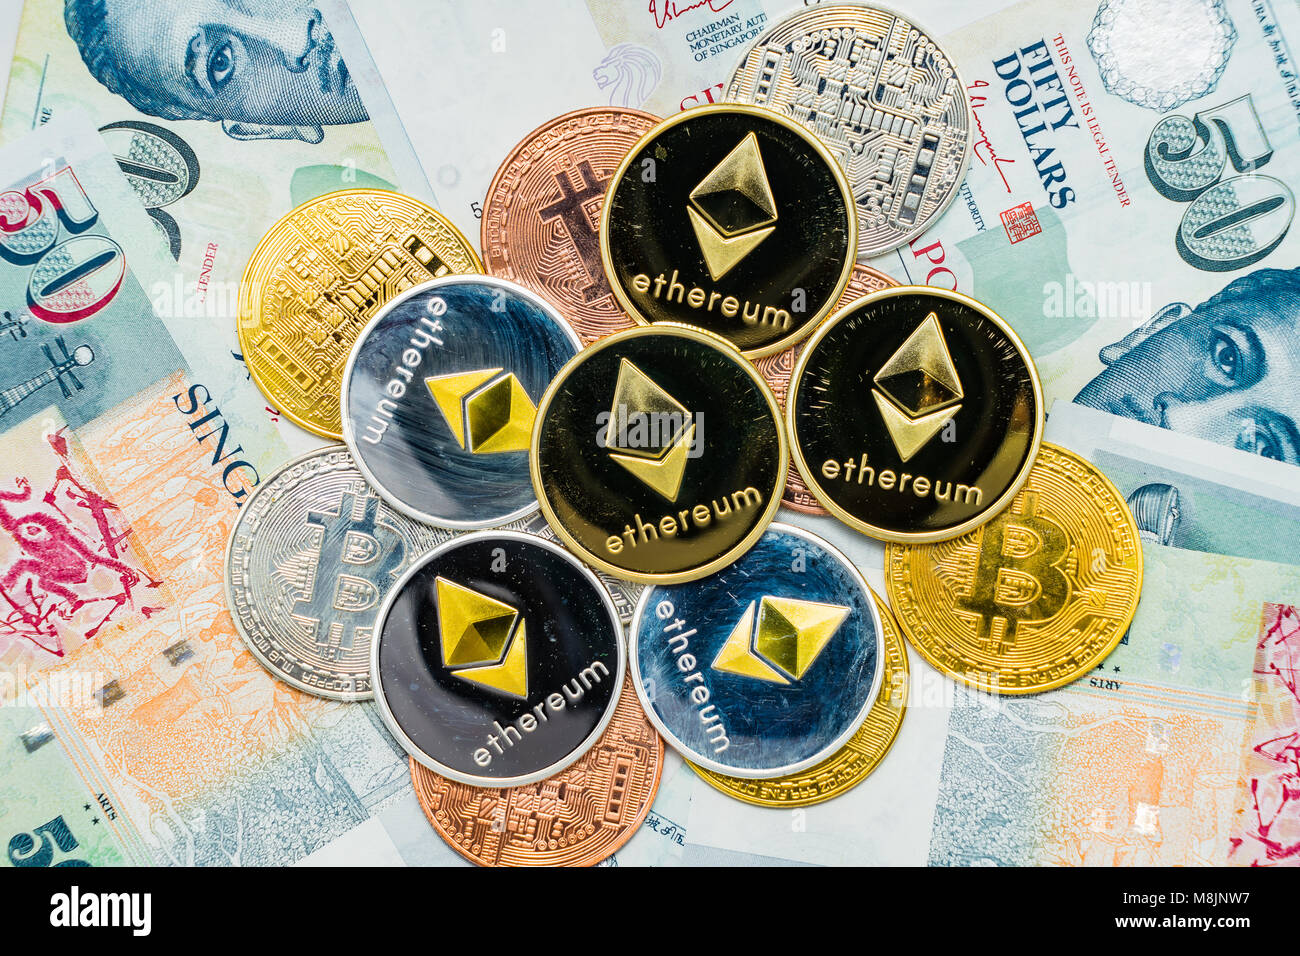 Singapore official cryptocurrency make money as a ethereum developer